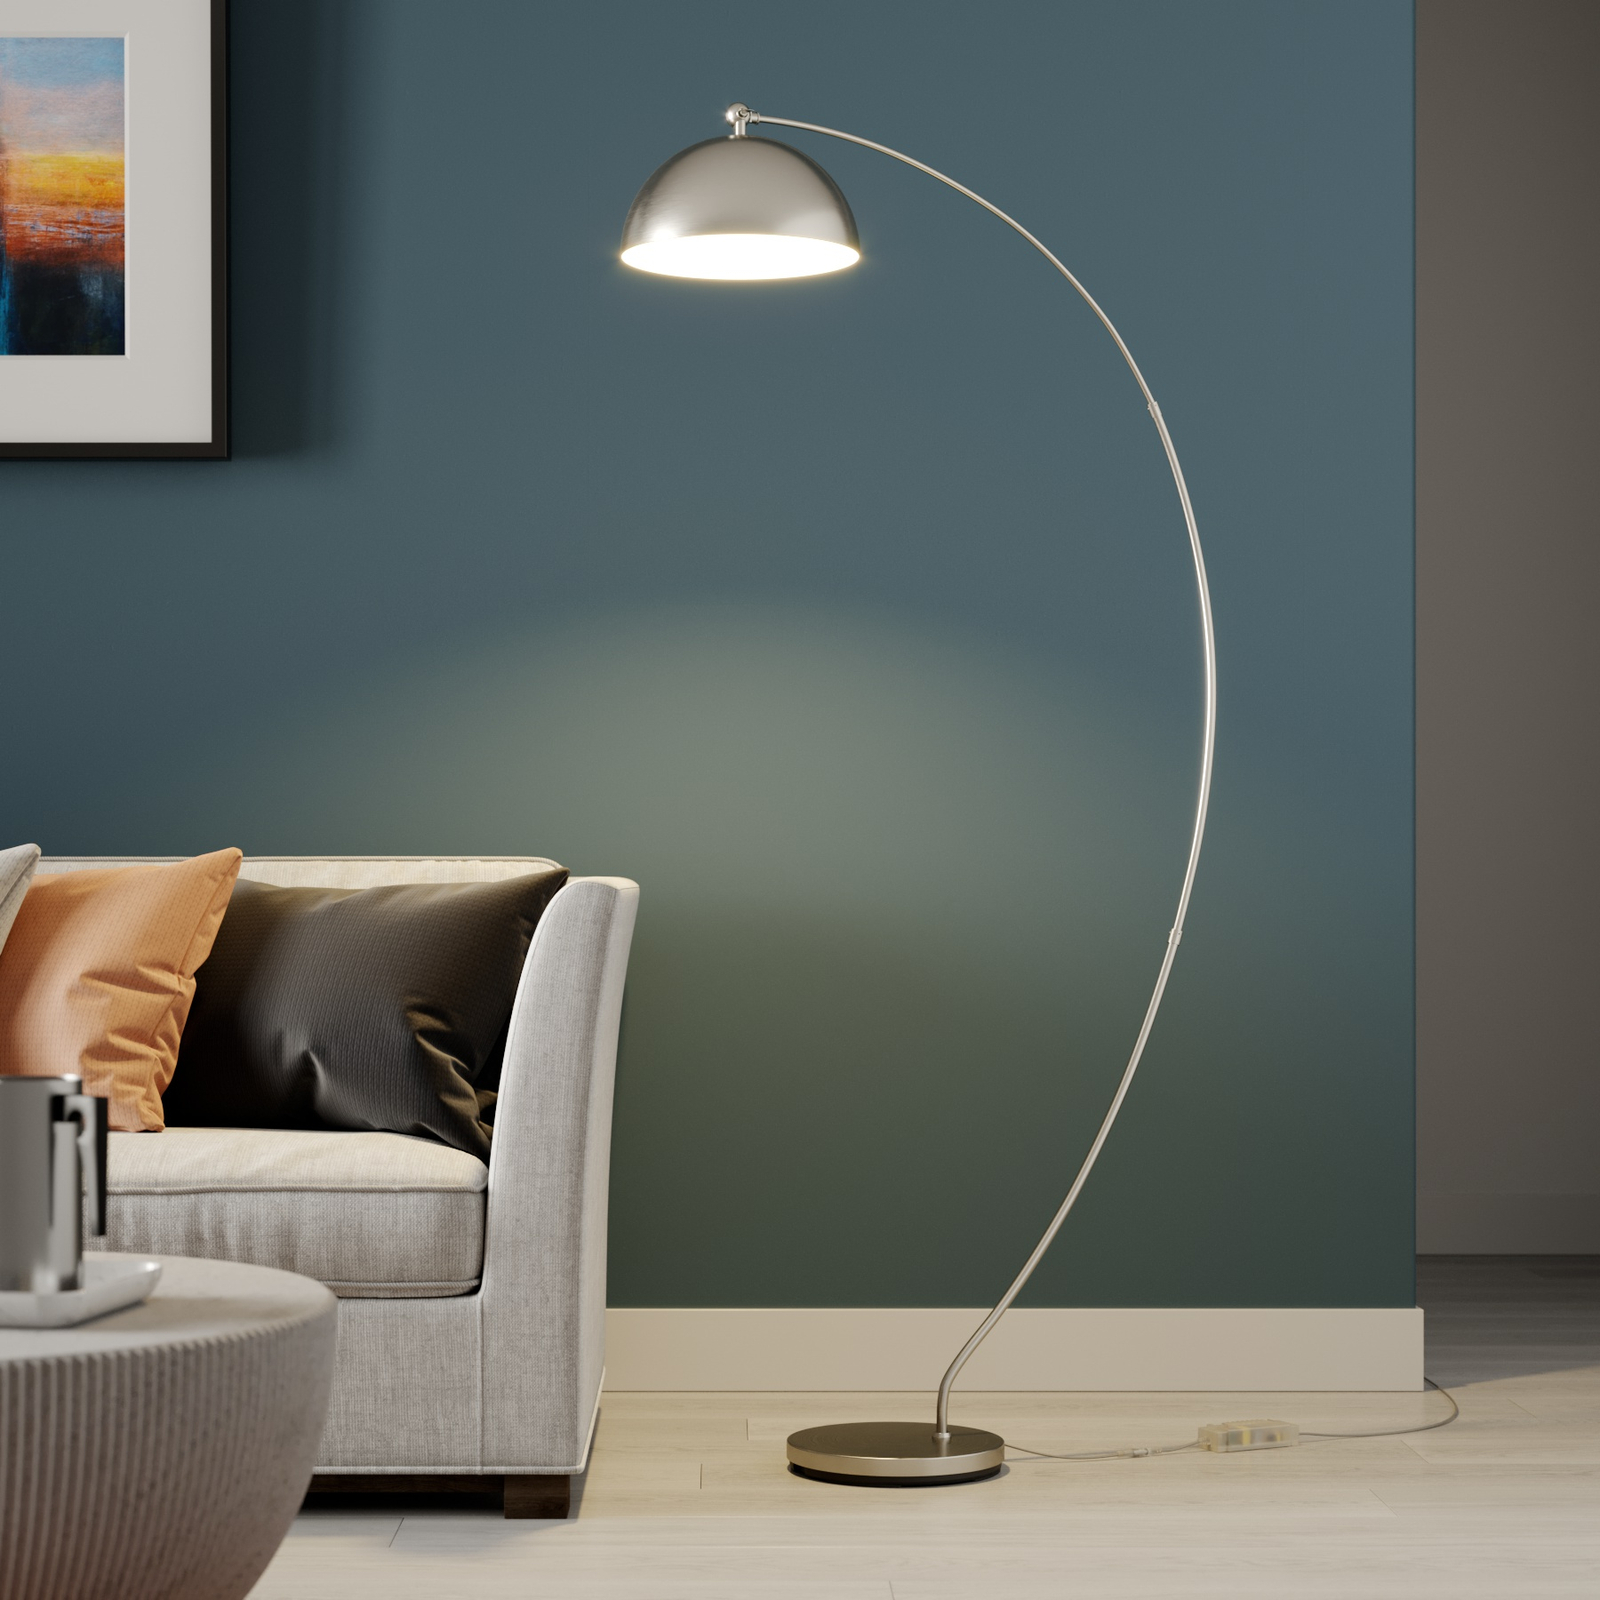 Lindby Zara LED arc lamp with a foot dimmer